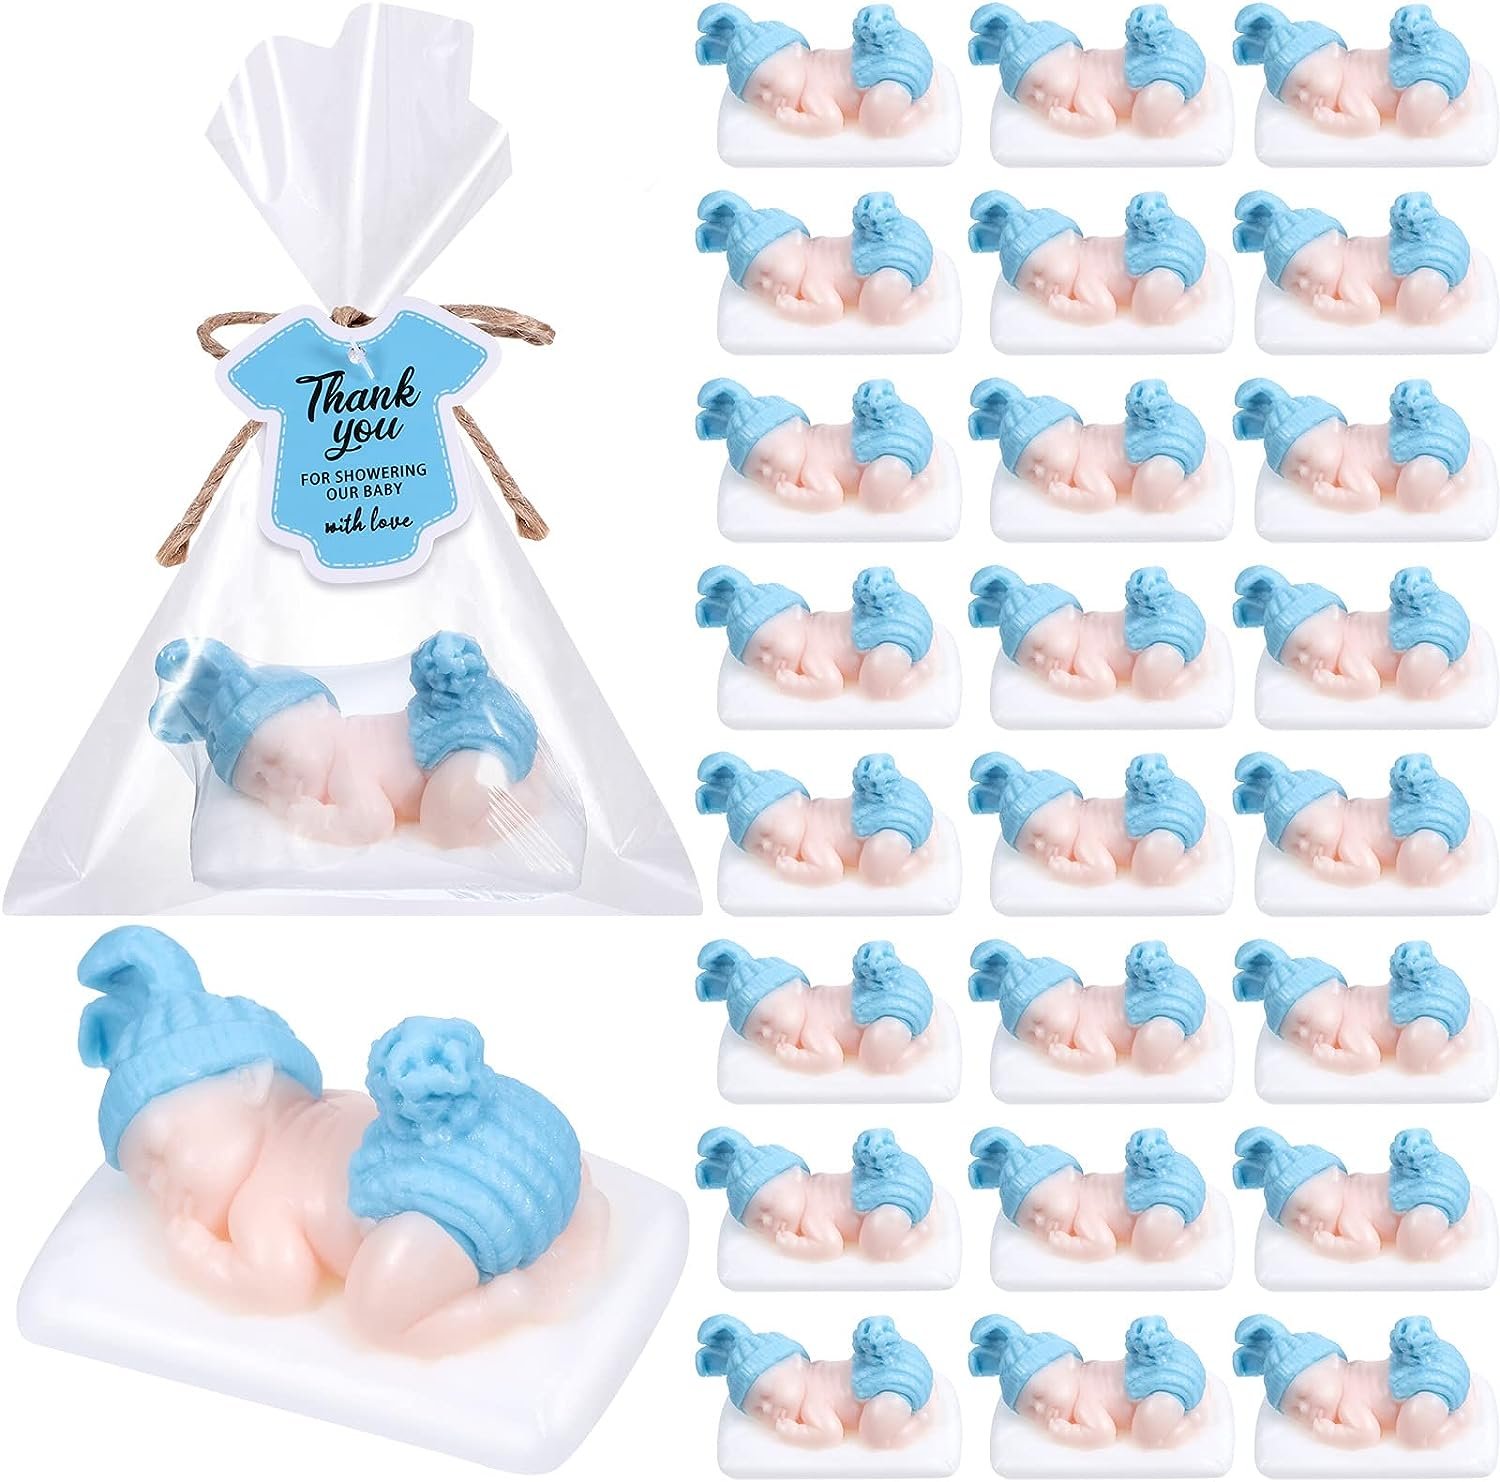 Otuuz Baby Shower Soap Favors Baby Shower Favors Handmade Sleeping Baby Gift Soap Baby Shower Scented Soap Favors with Gift Tags for Guests Girl Boy Baby Shower Favors Decorations (24 Packs, Blue)